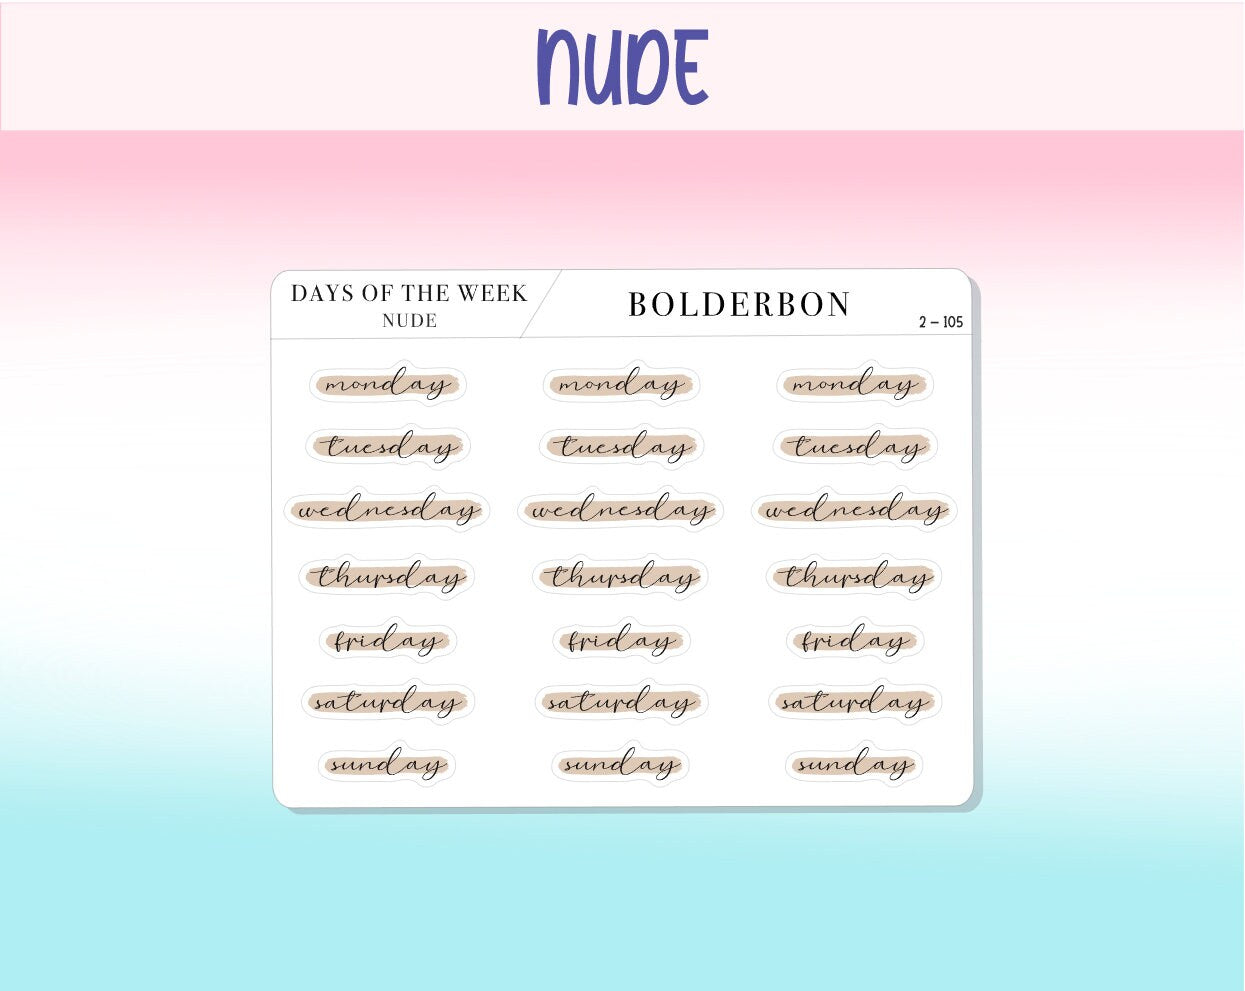 Days Of The Week NEUTRAL || Highlighted, Planner Stickers